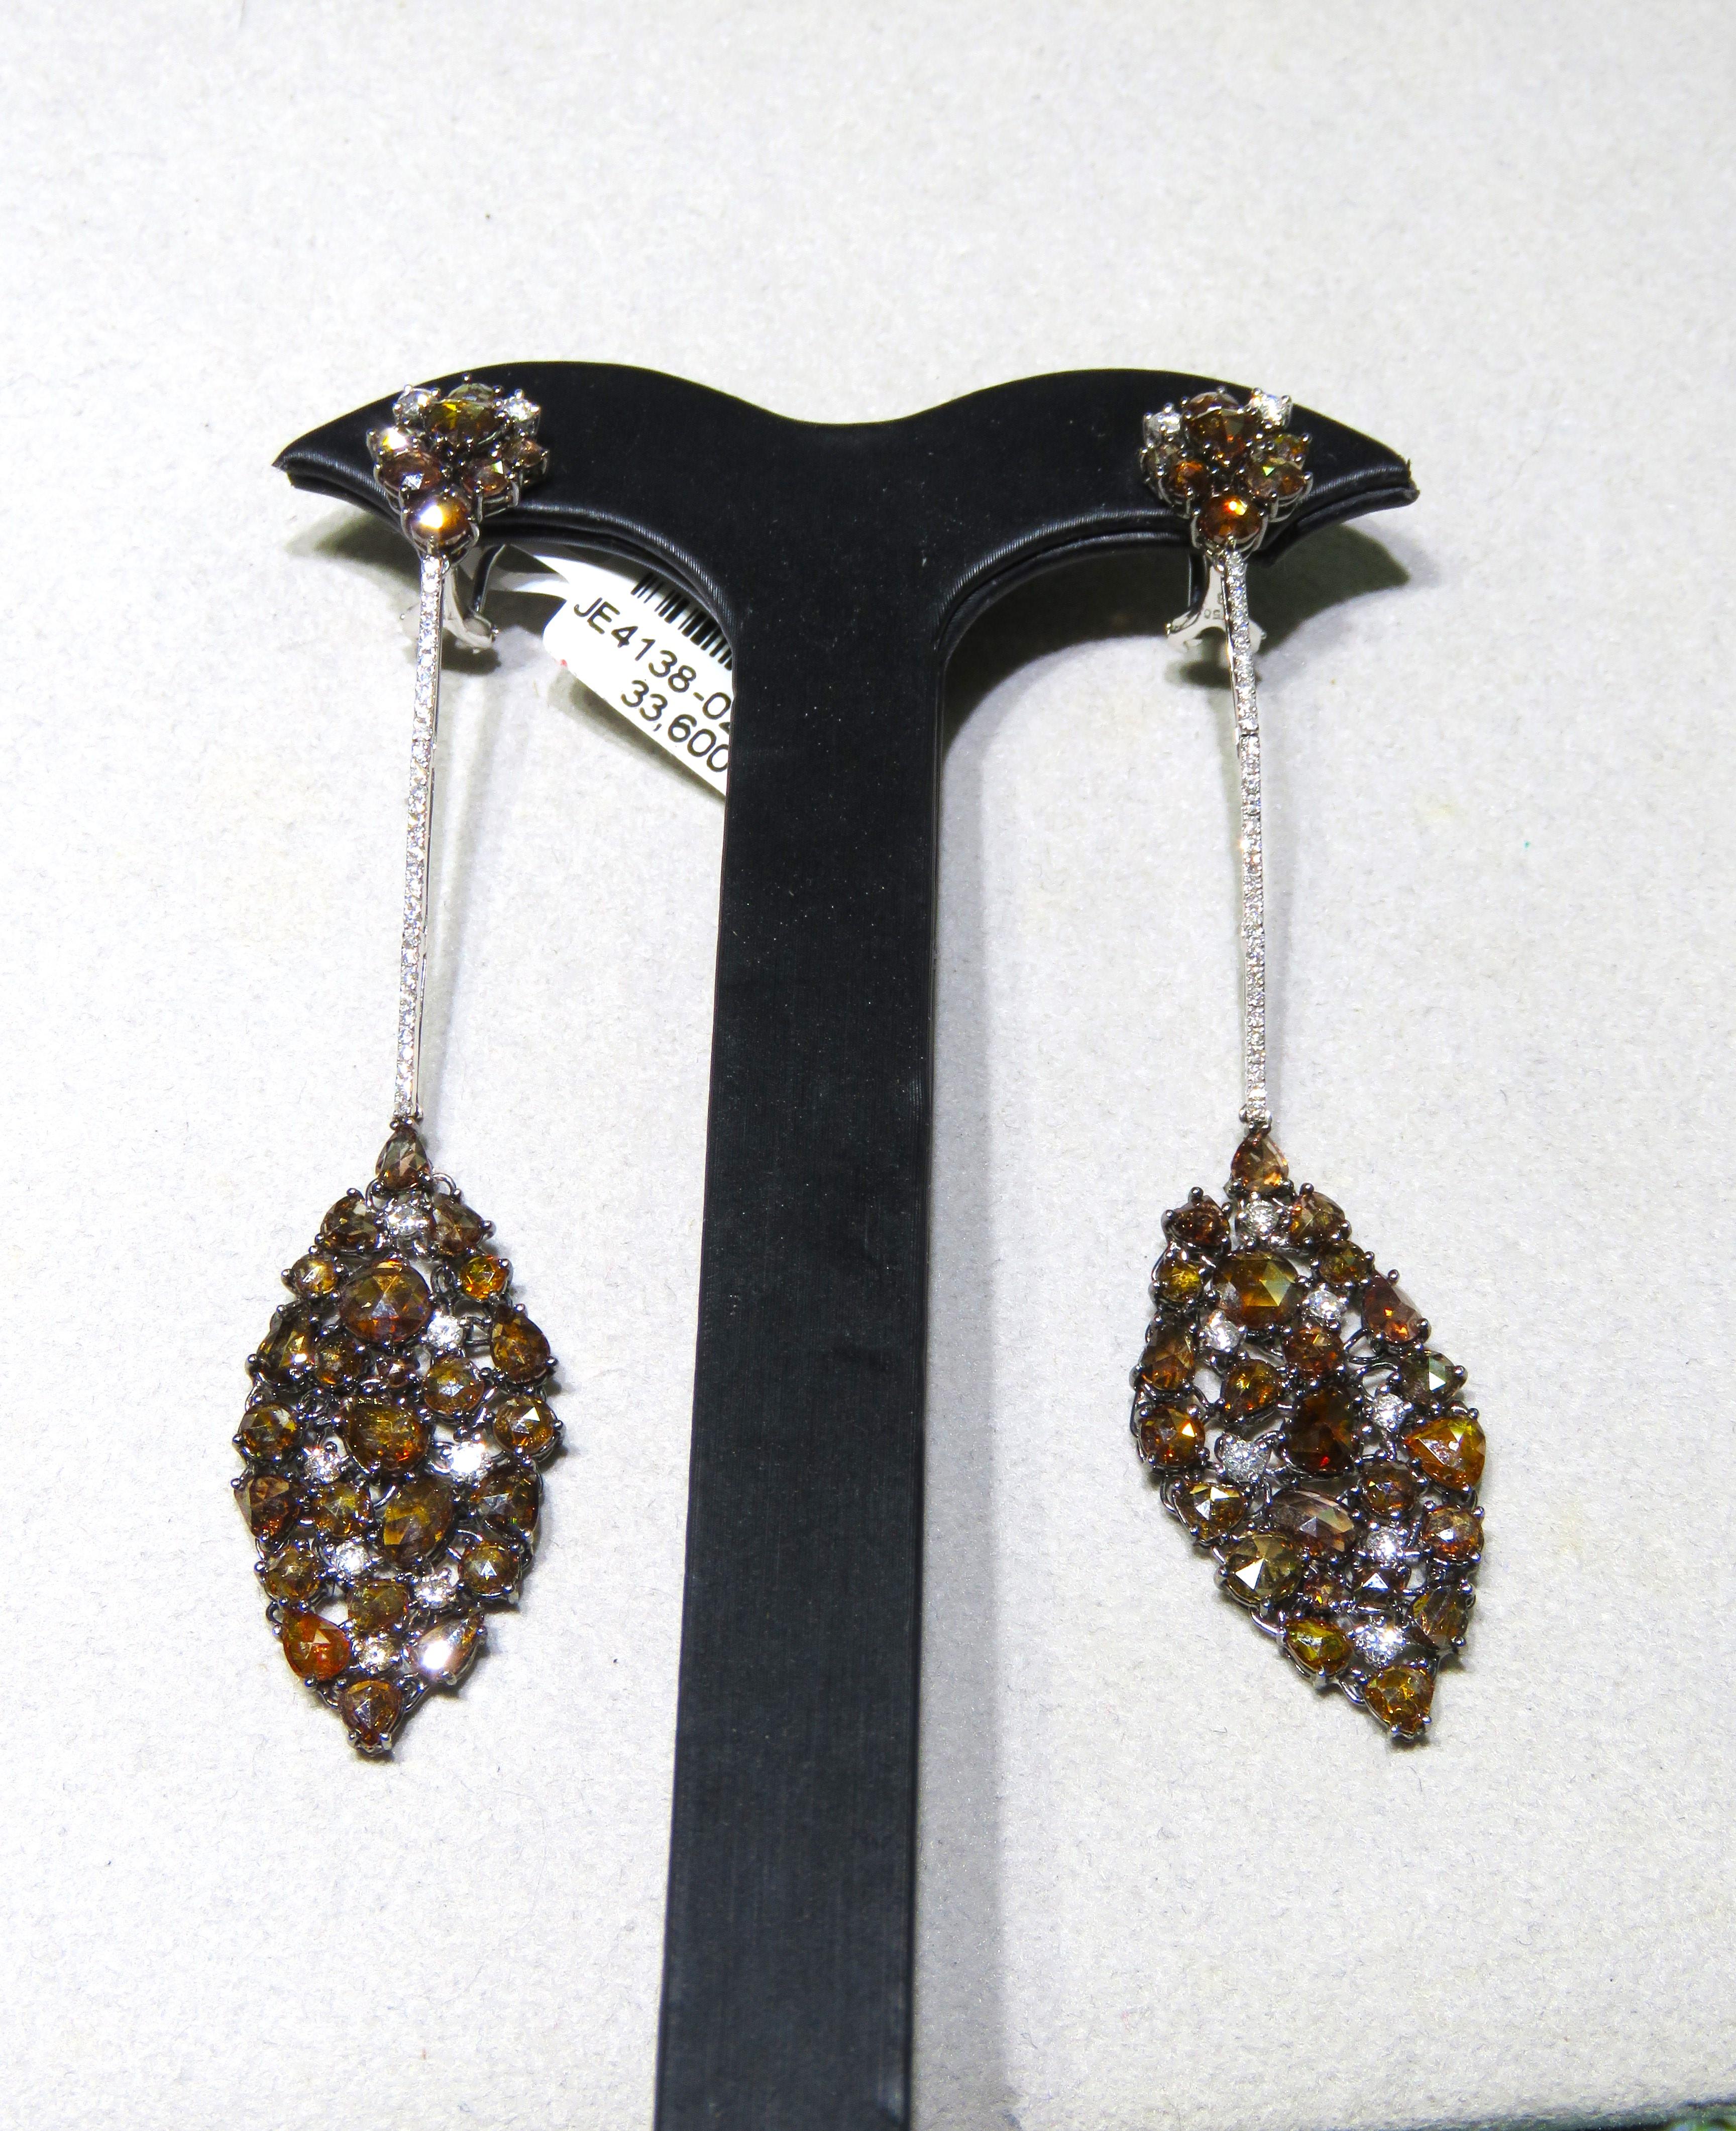 The Following Item we are offering are these Extremely Rare Beautiful 18KT Gold Fine Large Fancy Orange and Cognac Diamond Dangle Earrings. Each Earring features Rare Gorgeous Glittering Fancy Orange and Cognac Diamonds Draped with Sparkling White